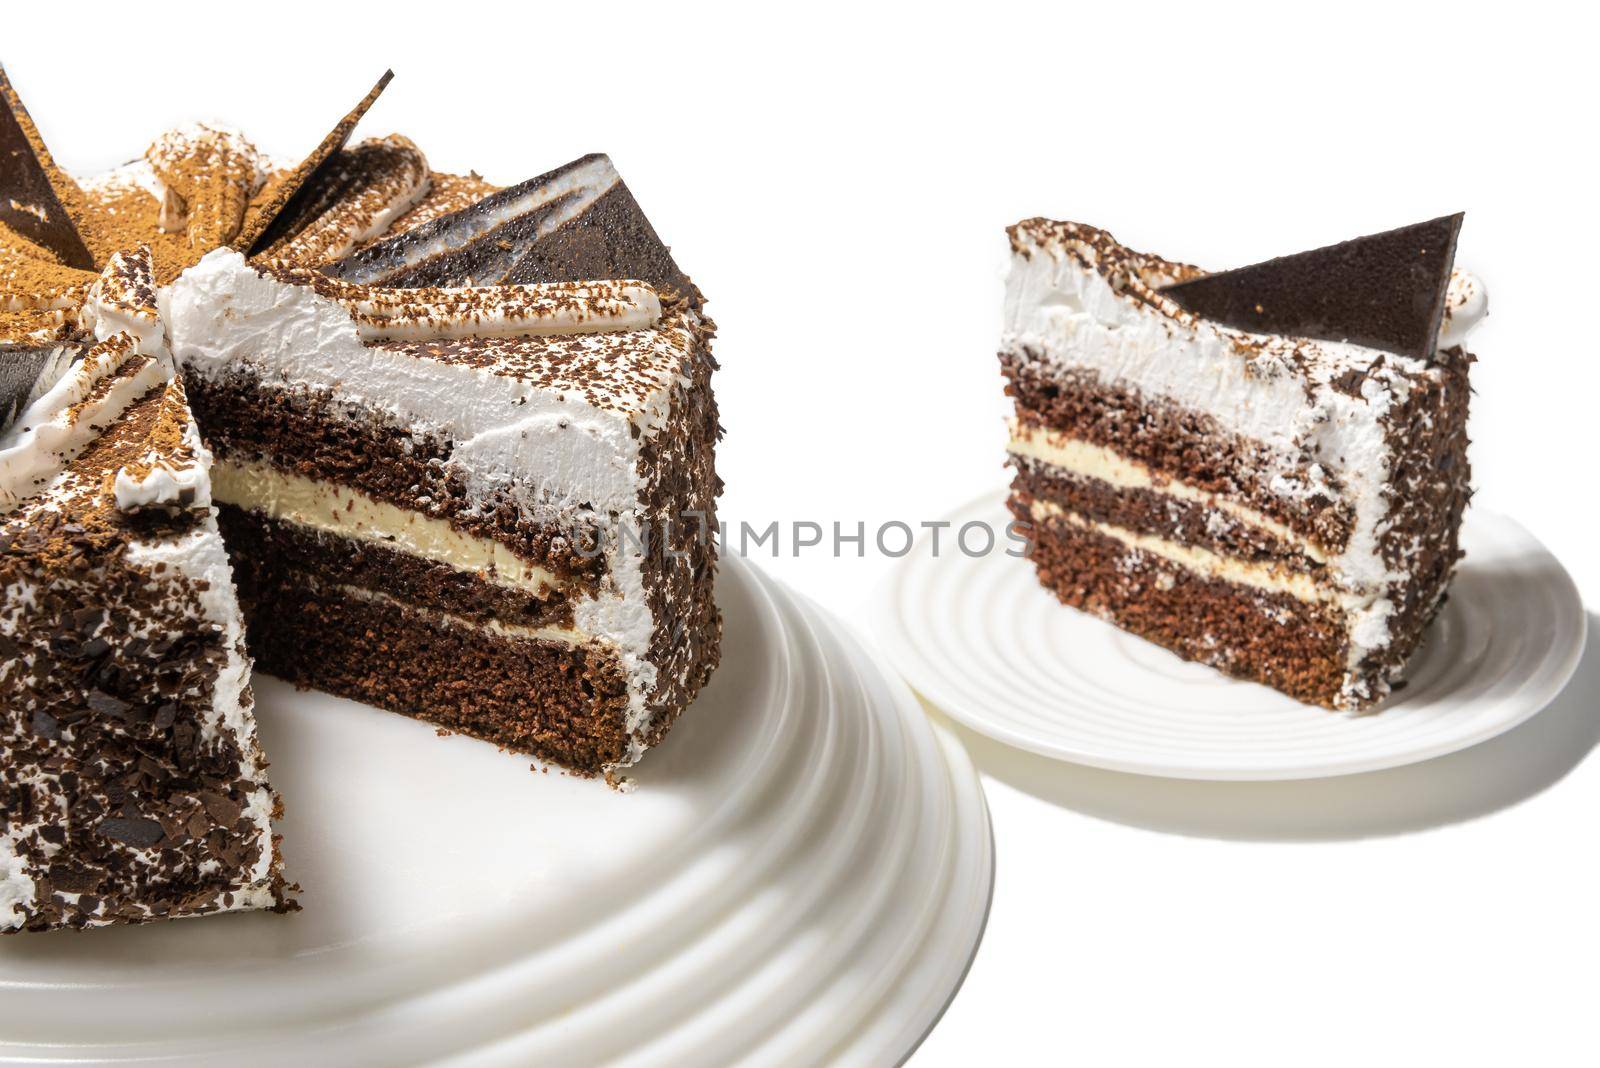 cake with chocolate, sprinkled with chocolate chips, on a tray on a white background with a cut piece.